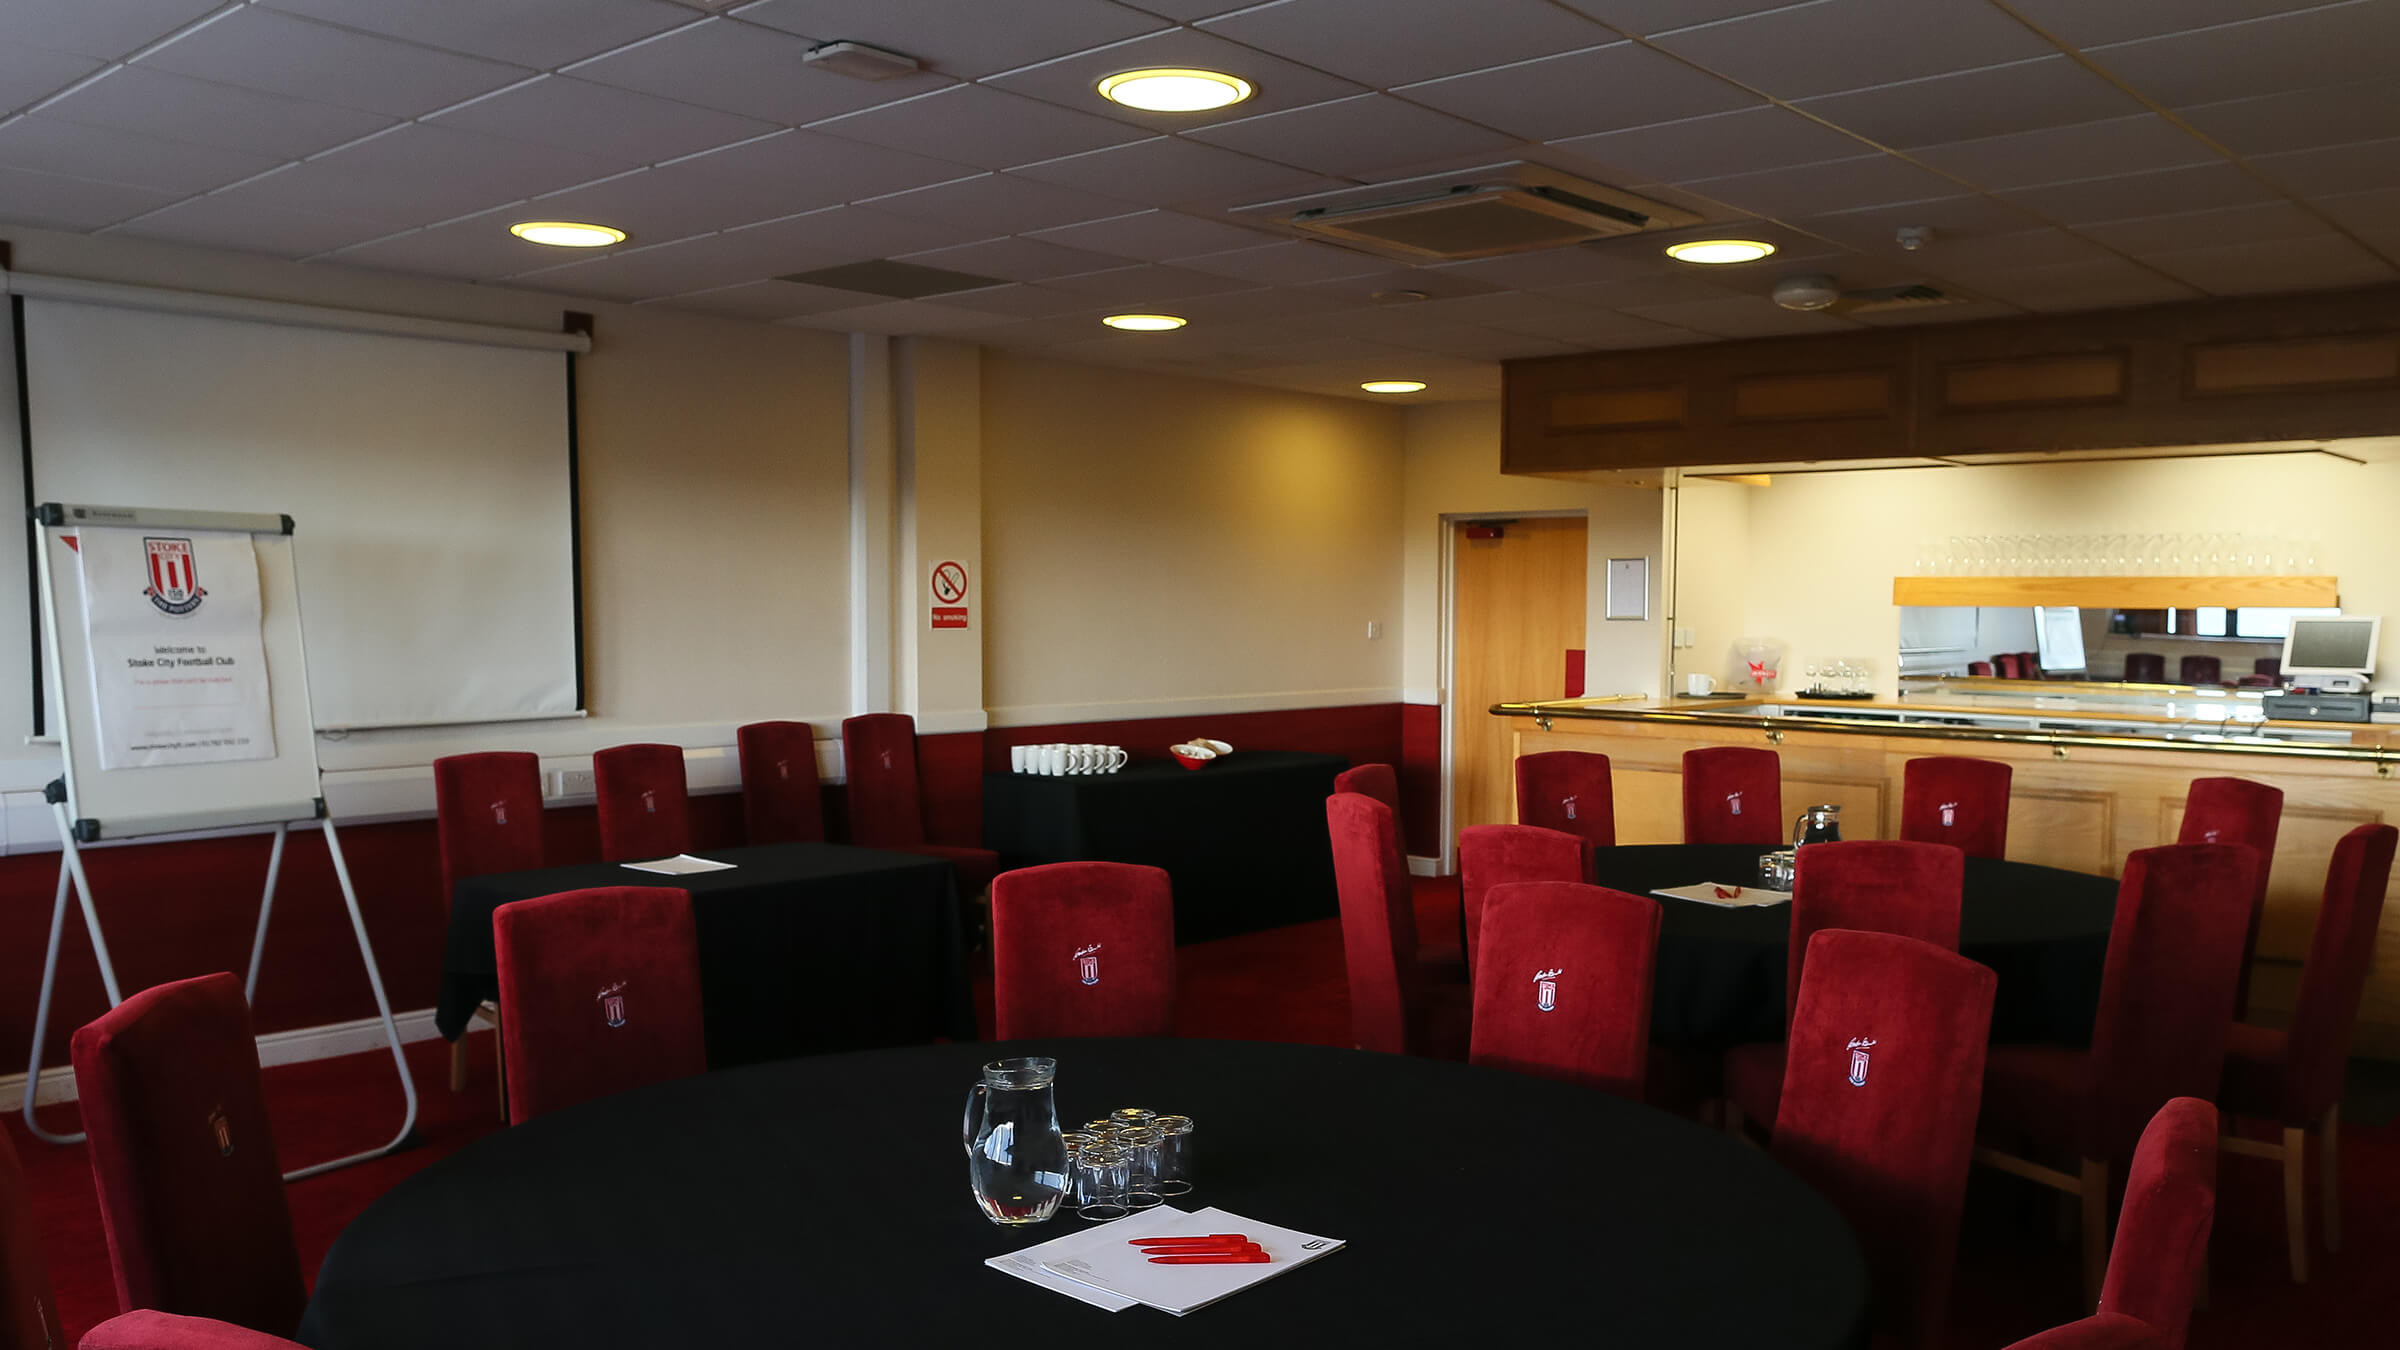 Hire Stoke City Football Club | Player's Lounge | VenueScanner